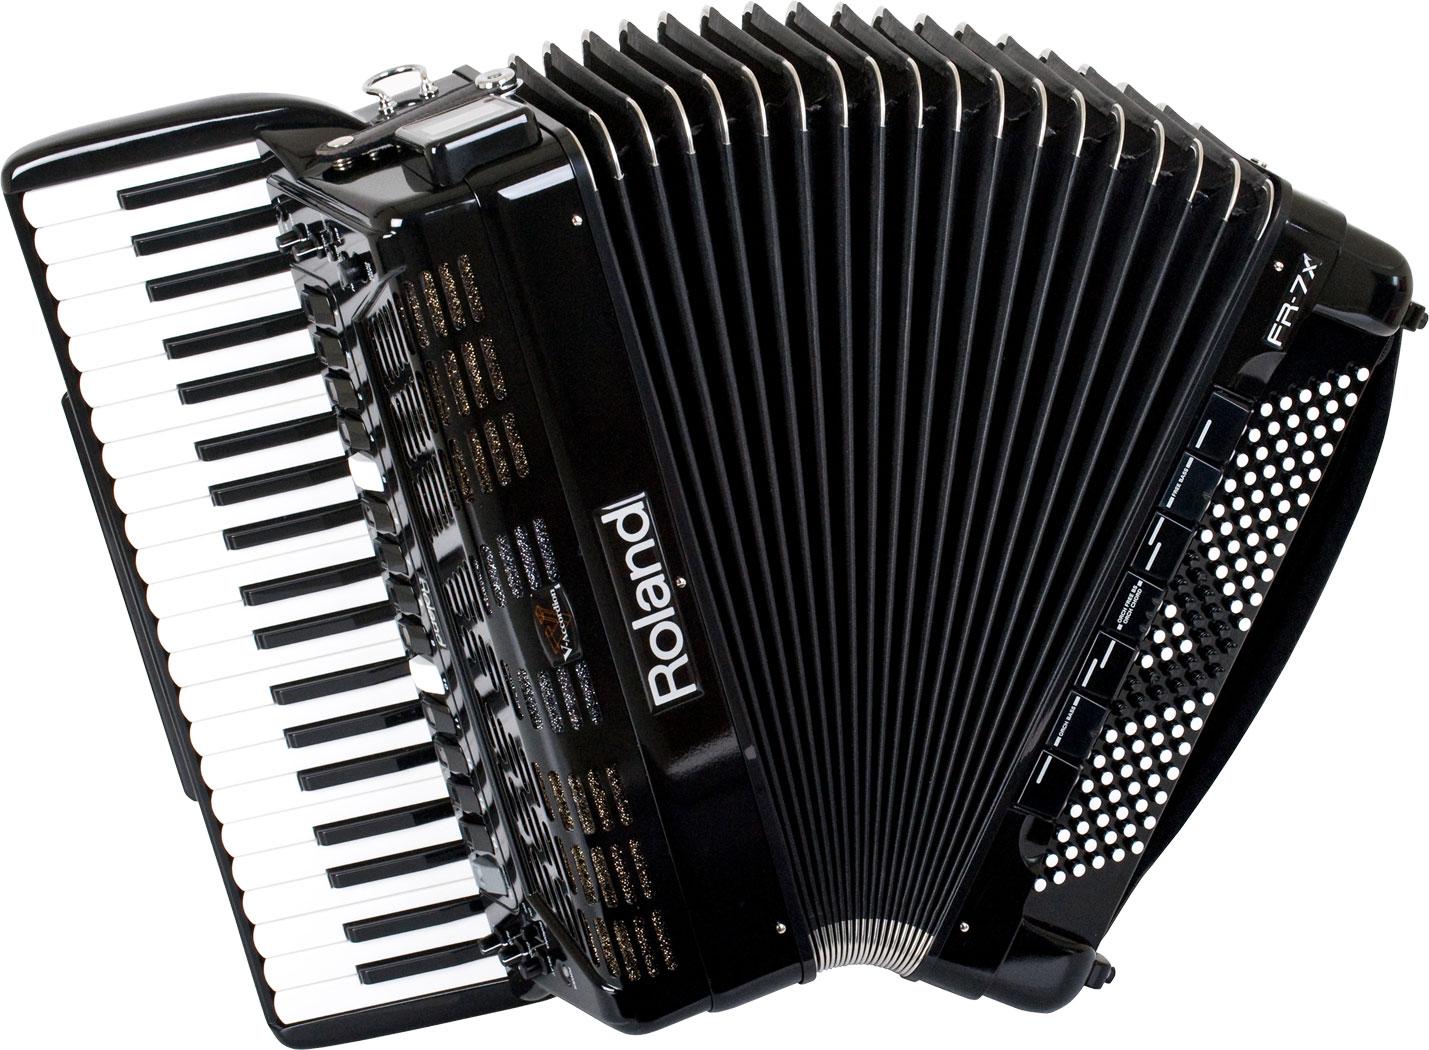 Accordion Widely Spread Instrument # 1429x1050. All For Desktop